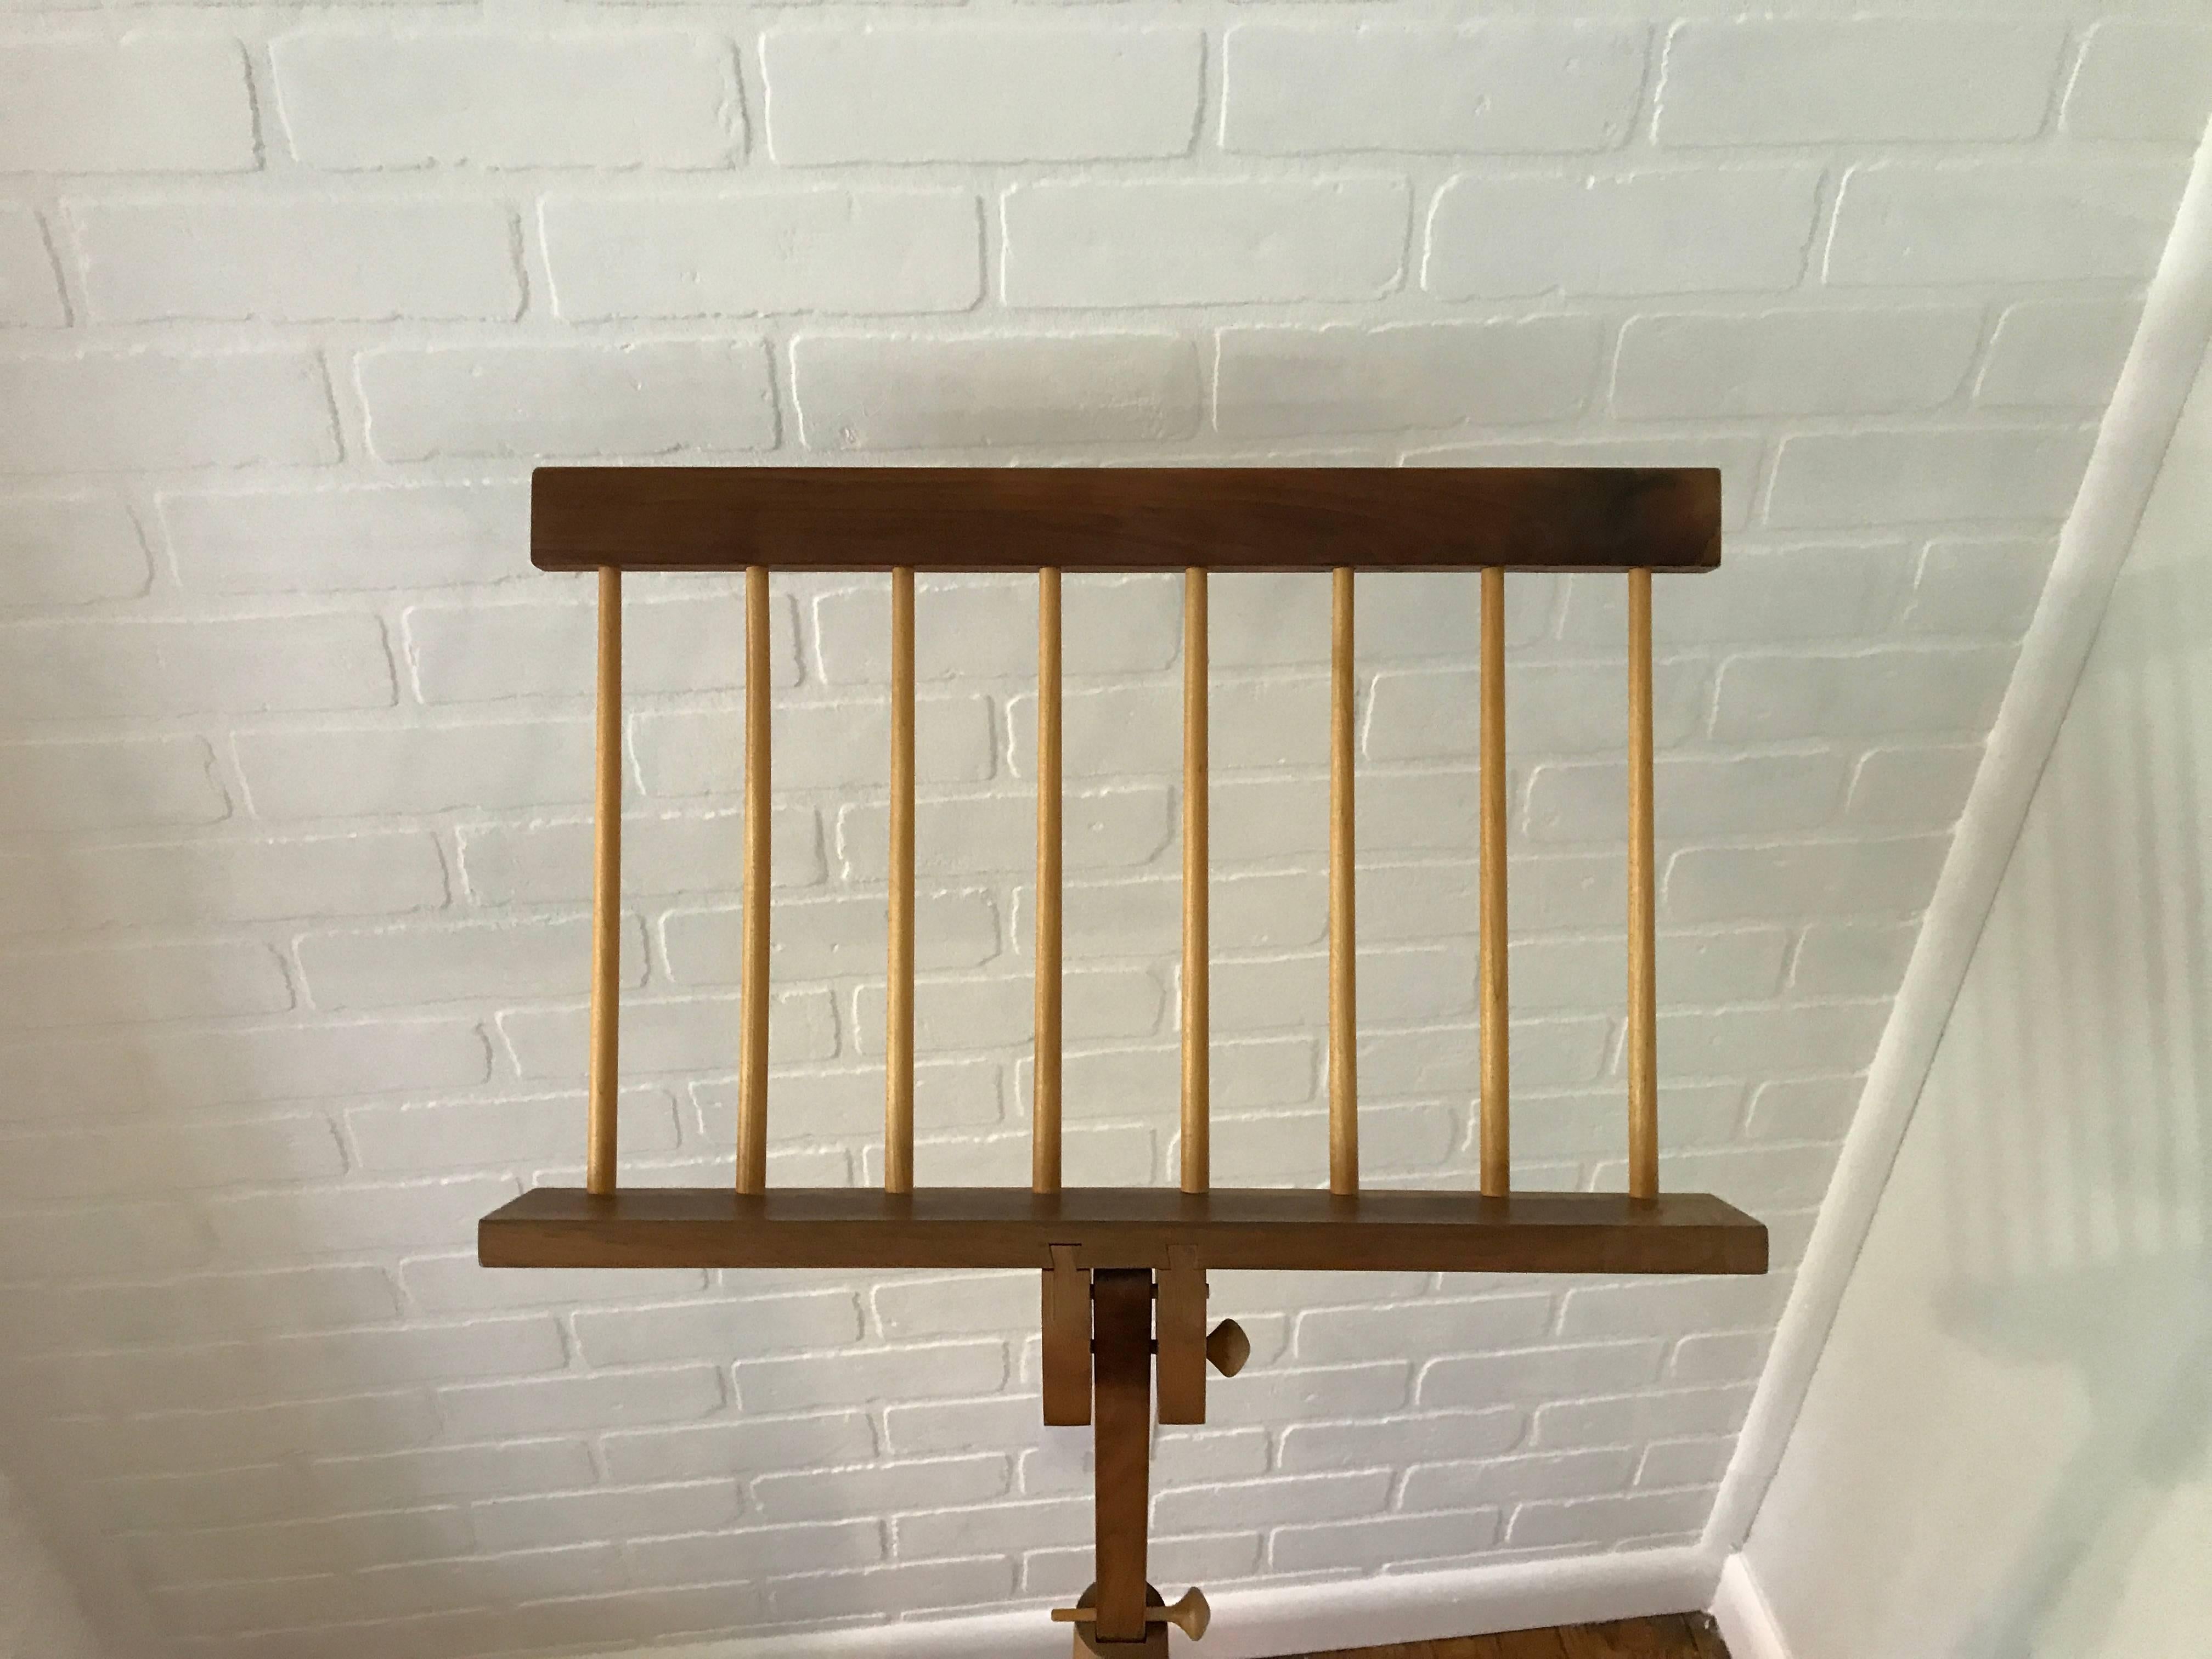 Offered is a stunning, 1960s modern American craft artisan music stand by Tom Dumke in the style of George Nakashima.